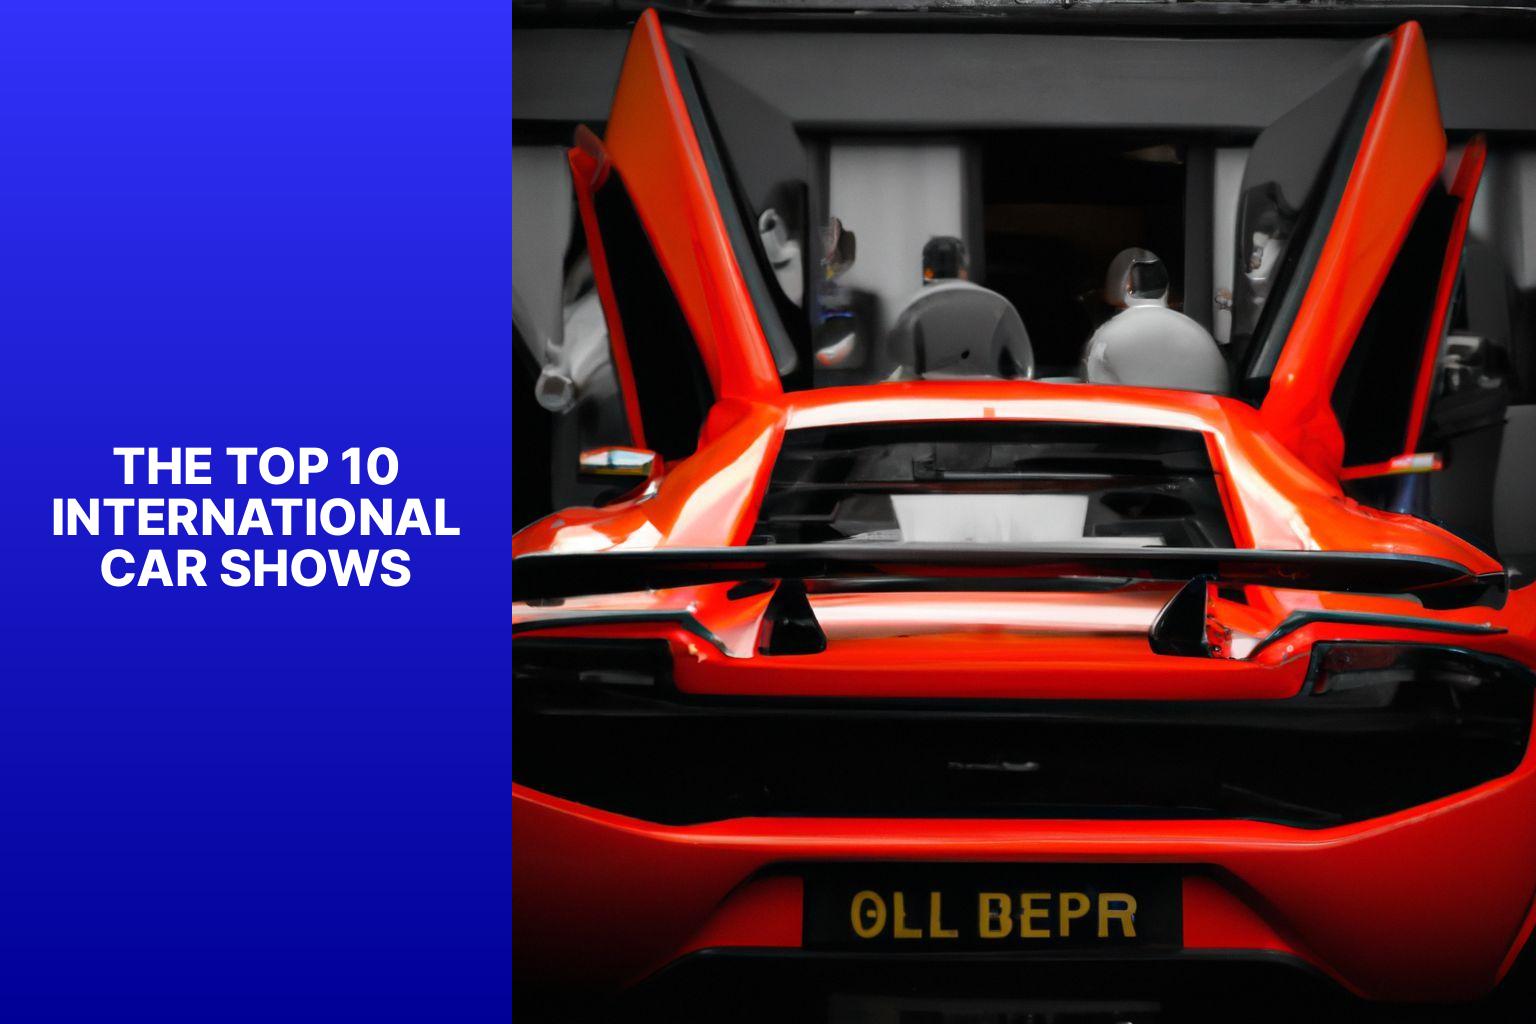 The Top 10 International Car Shows - Top 10 International Car Shows Every Enthusiast Should Attend 